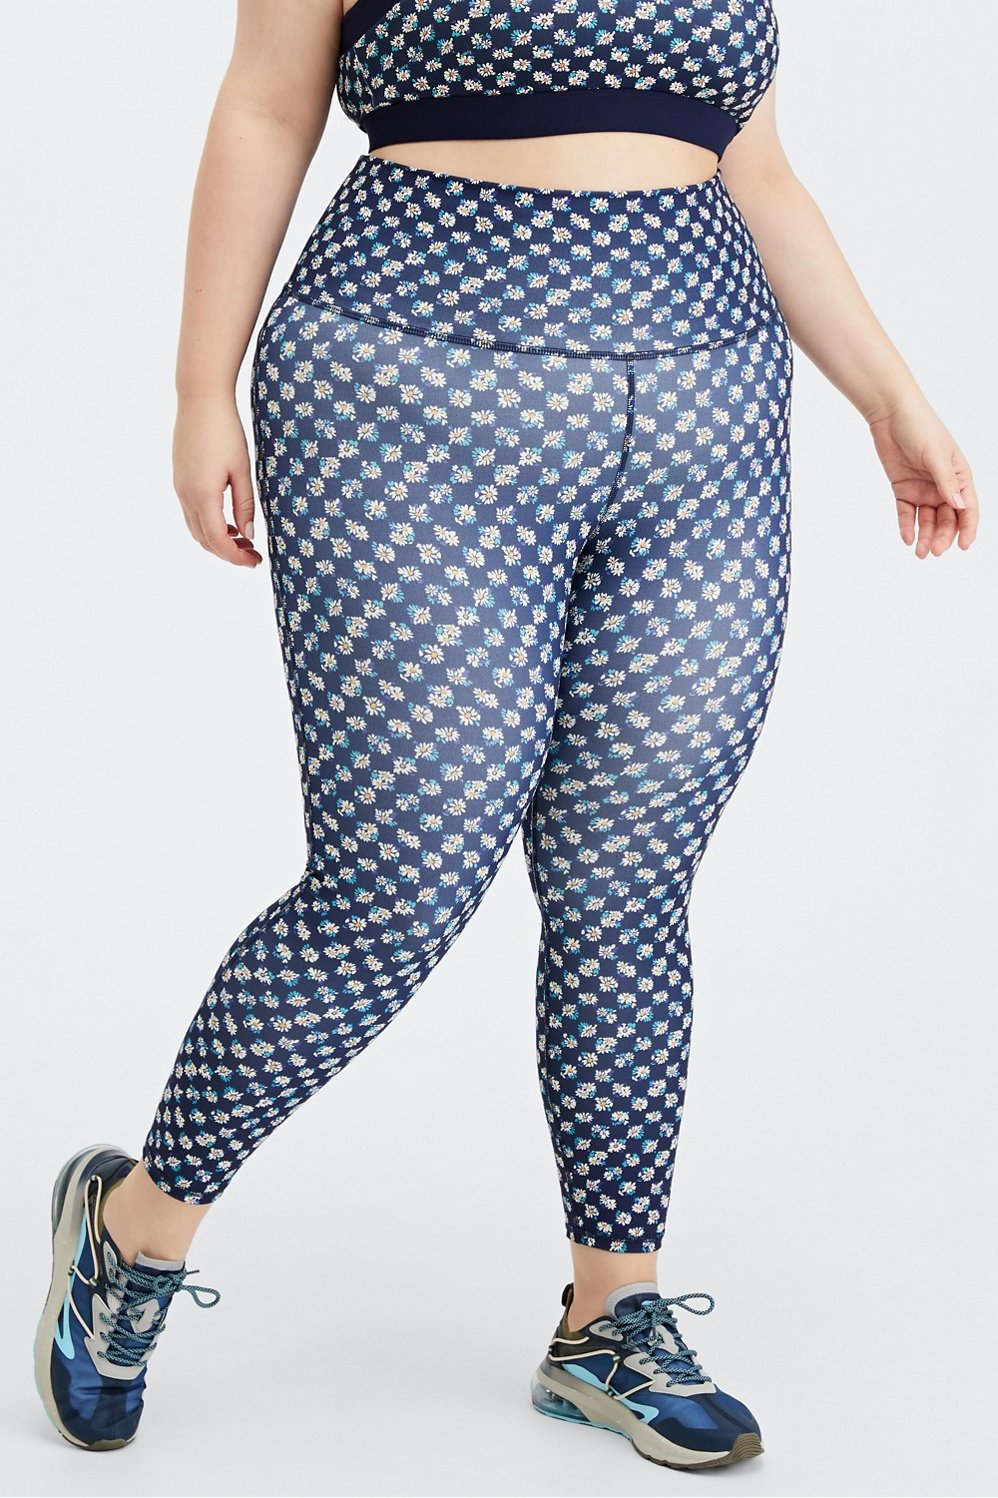 PureLuxe Ultra High-Waisted 7/8 Legging - - Fabletics Canada